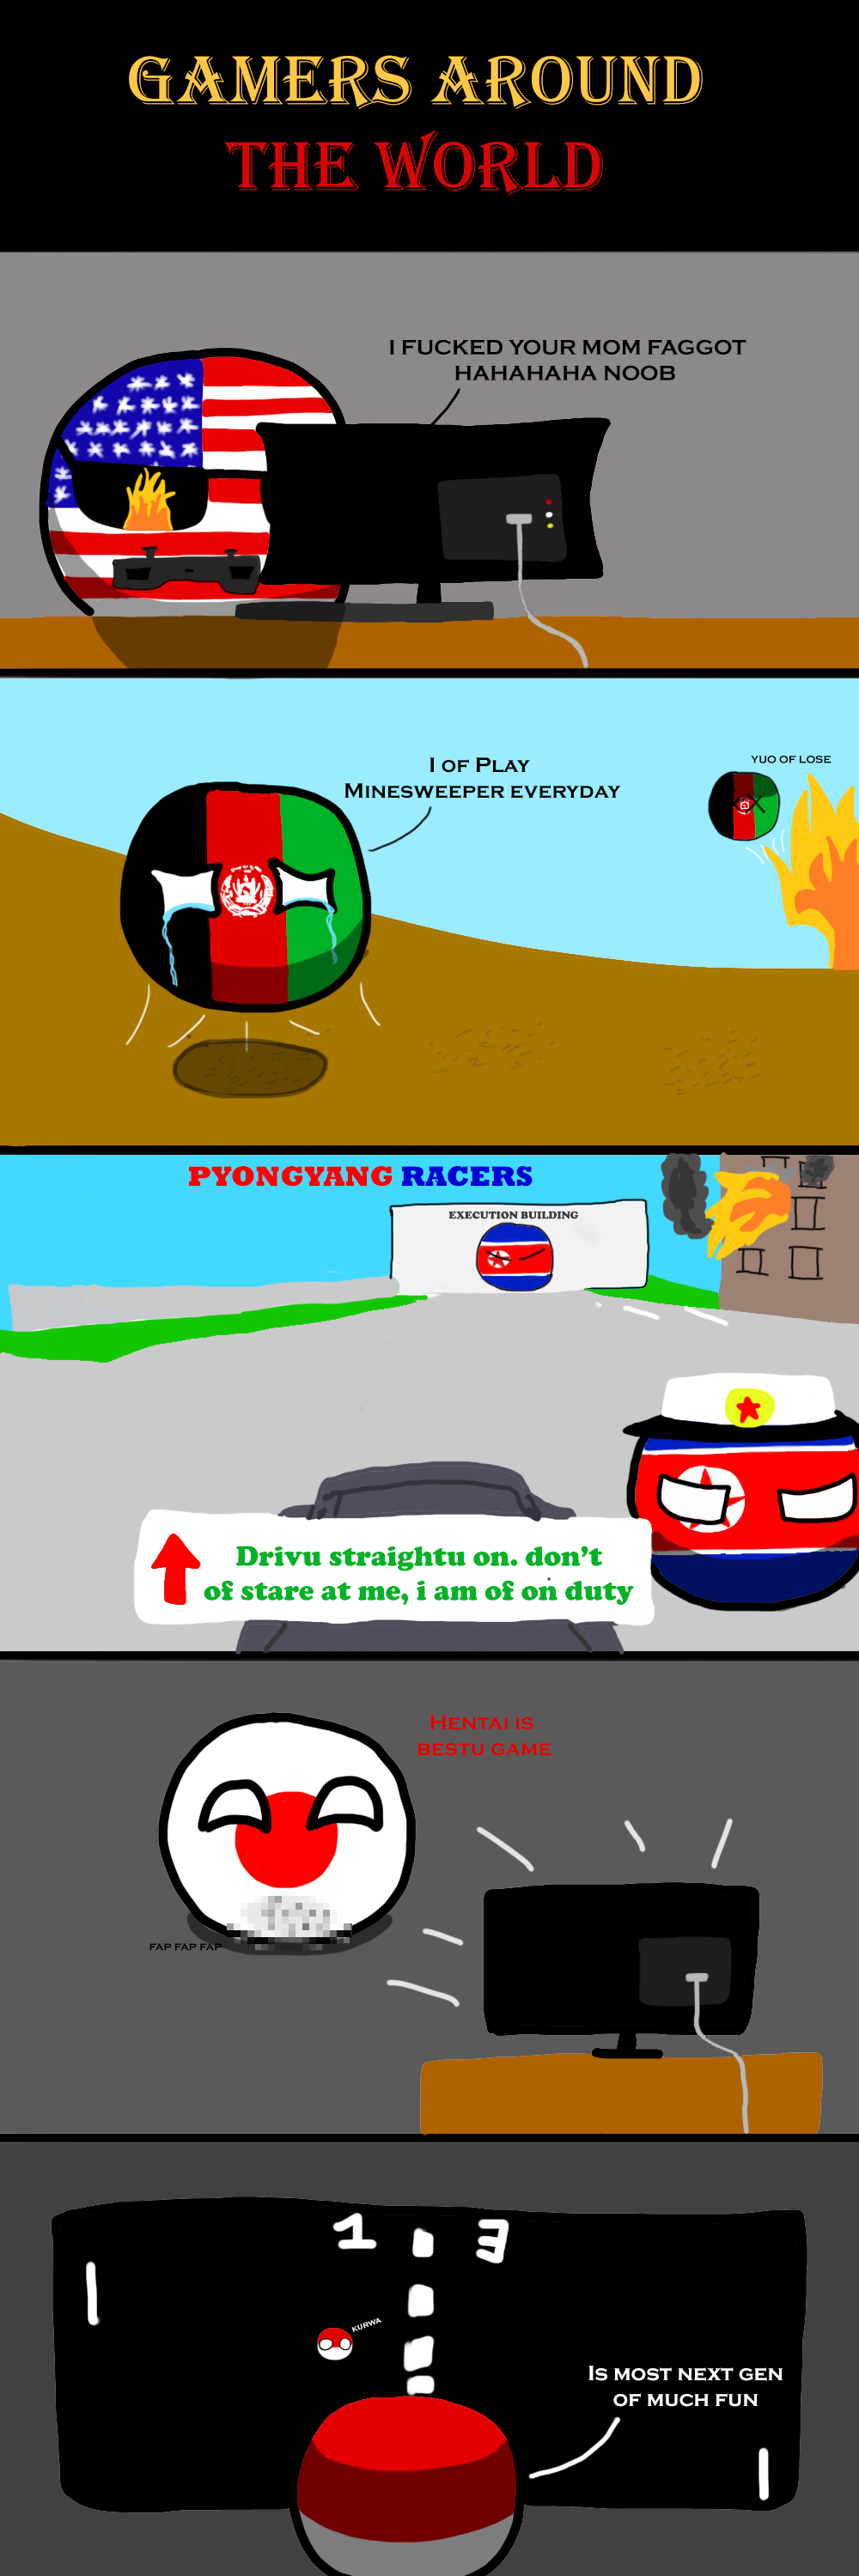 Polandball Comics - Page 2 Gamers+around+the+world.+reposted+from+reddit+http+i.imgur.com+es8mGTq.png_cc8c41_4975395